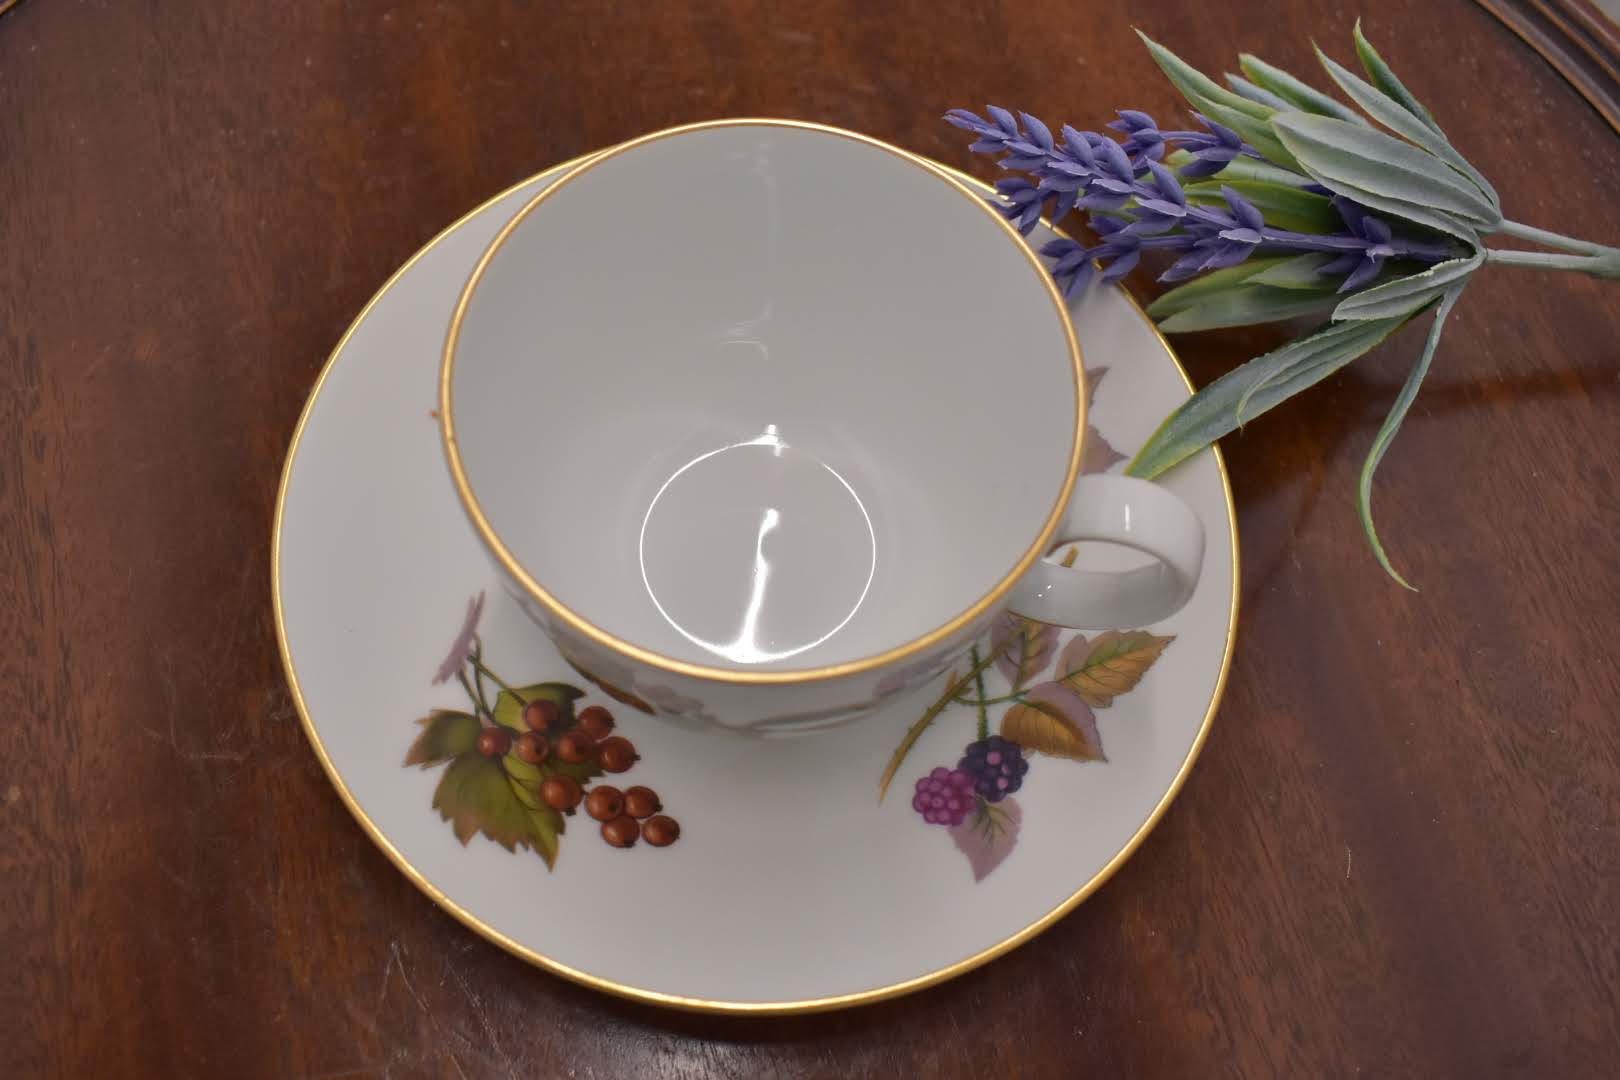 Royal Worchester Evesham - Fine Porcelain China - Cup and Saucer - Gold Trim - From England